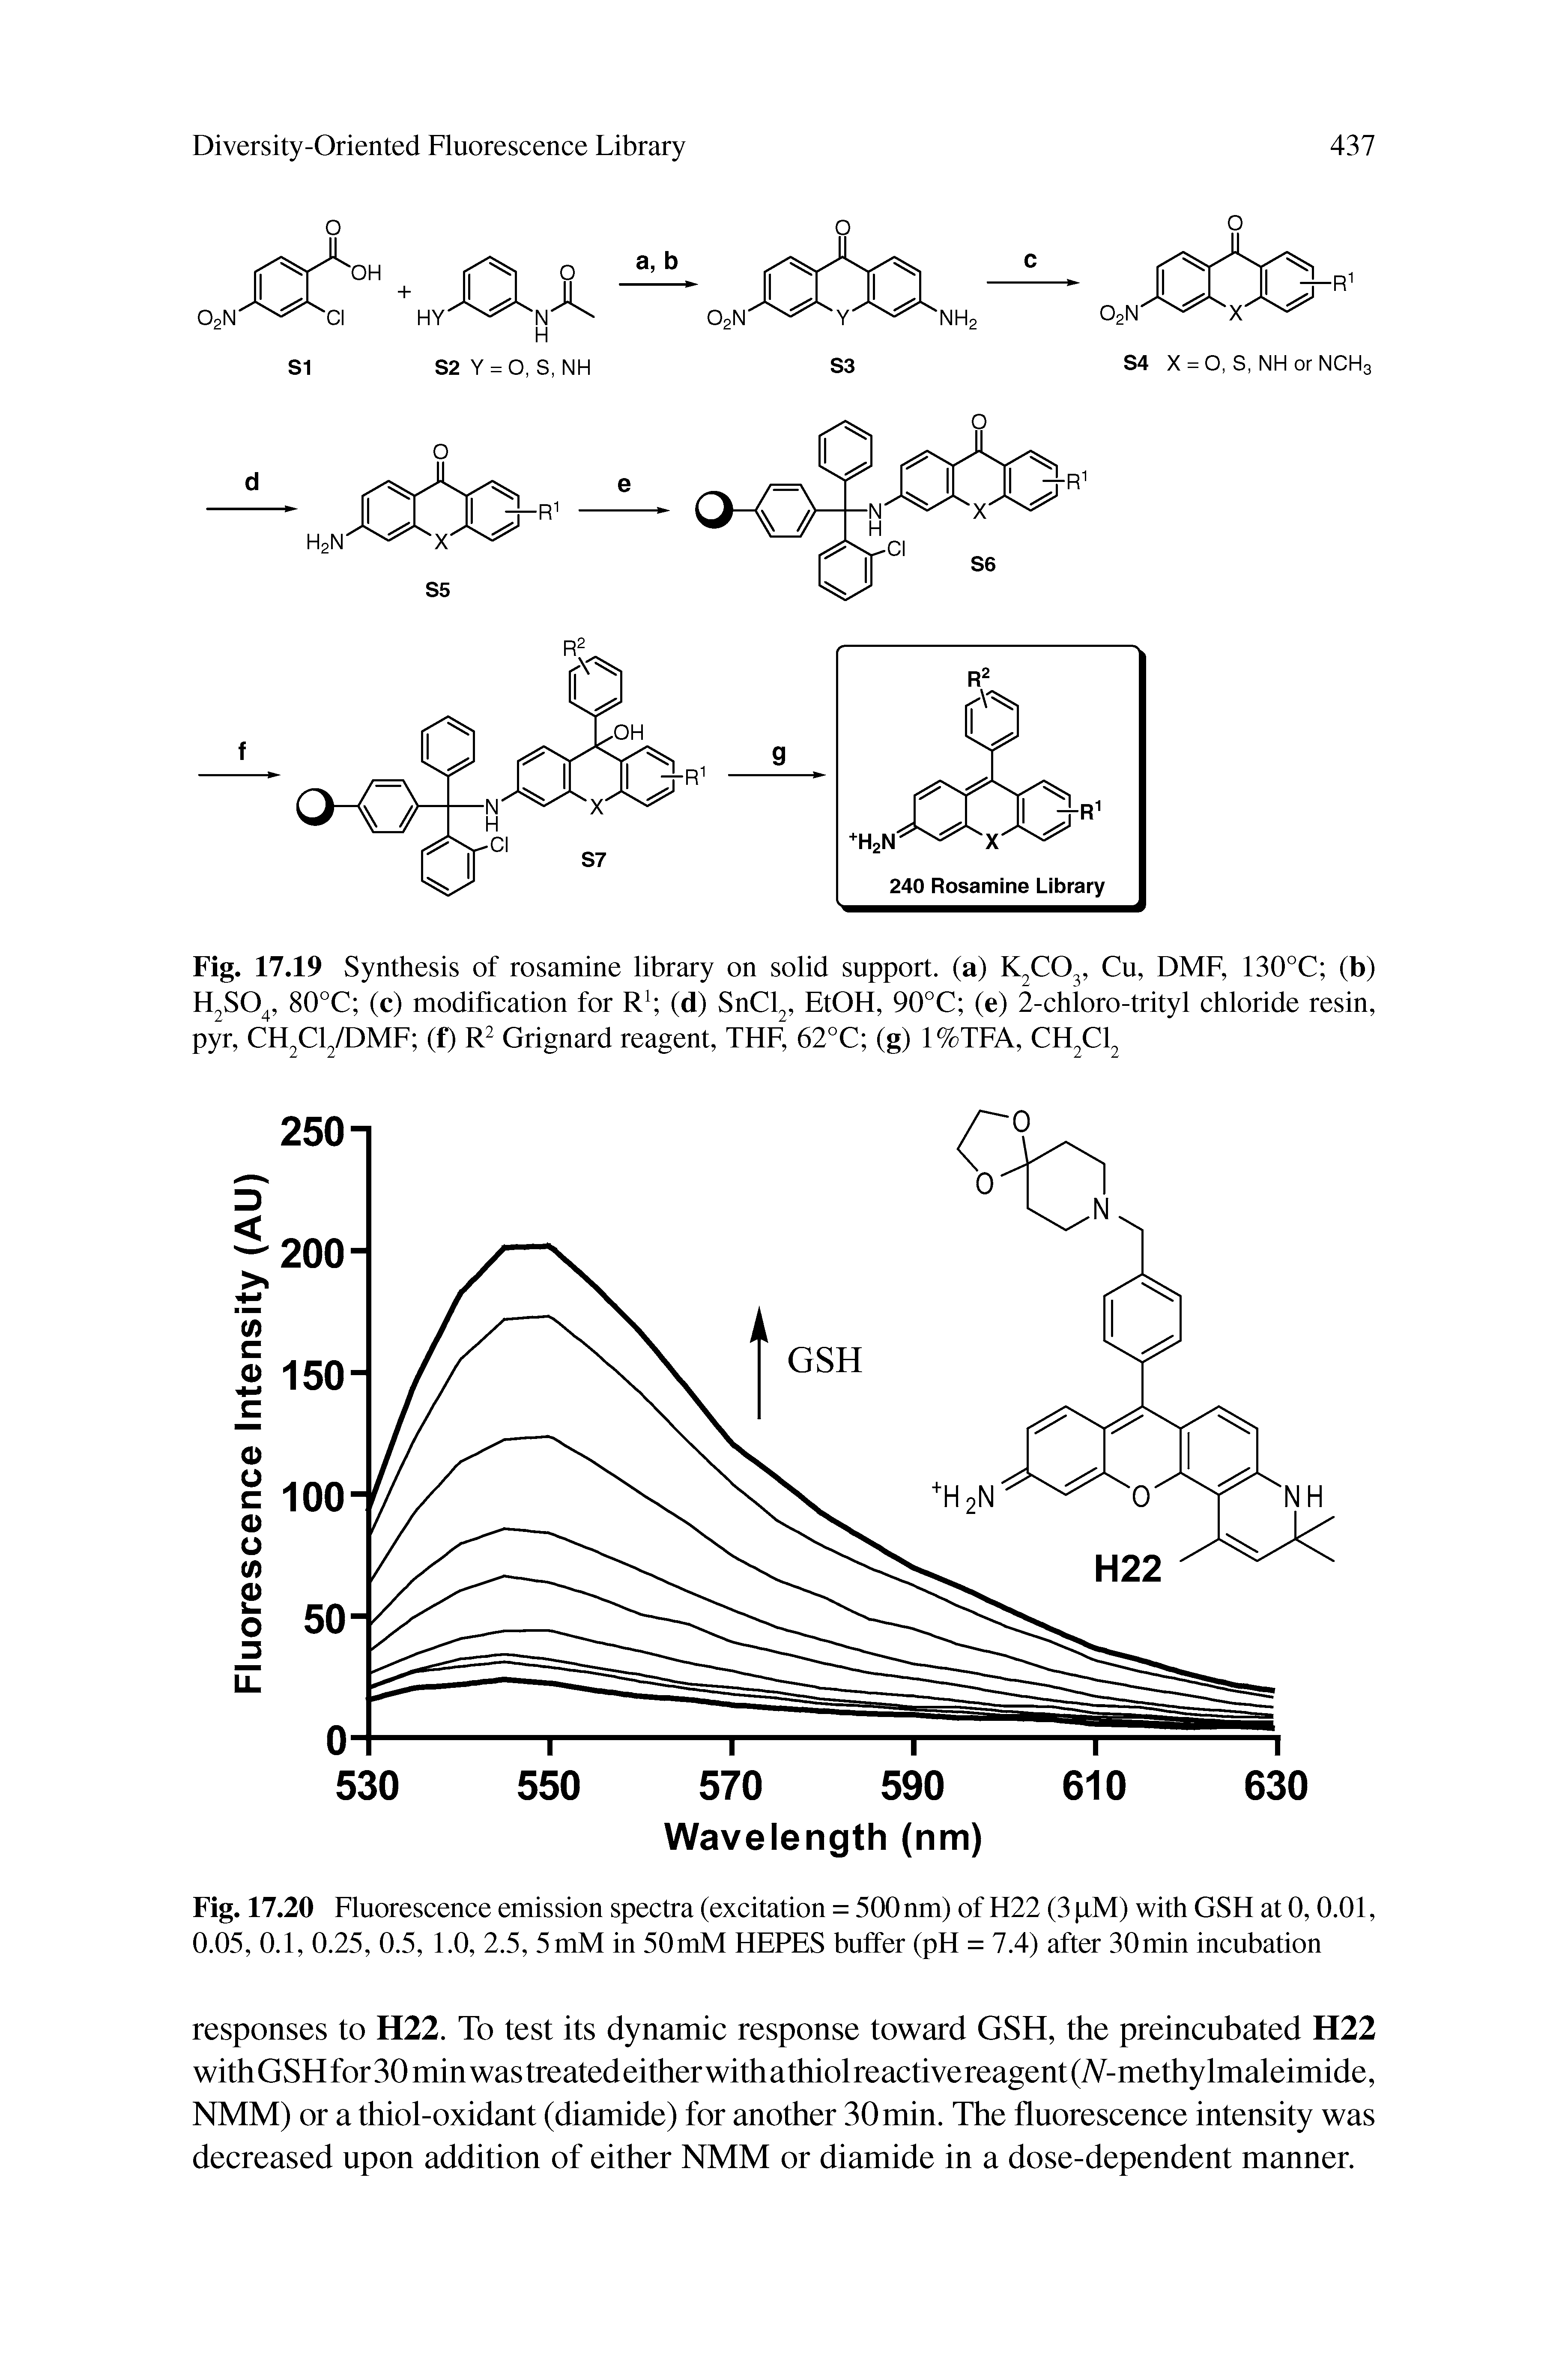 Fig. 17.19 Synthesis of rosamine library on solid support, (a) K2C03, Cu, DMF, 130°C (b) H2S04, 80°C (c) modification for R1 (d) SnCl2, EtOH, 90°C (e) 2-chloro-trityl chloride resin, pyr, CH2C12/DMF (f) R2 Grignard reagent, THF, 62°C (g) 1 %TFA, CH2C12...